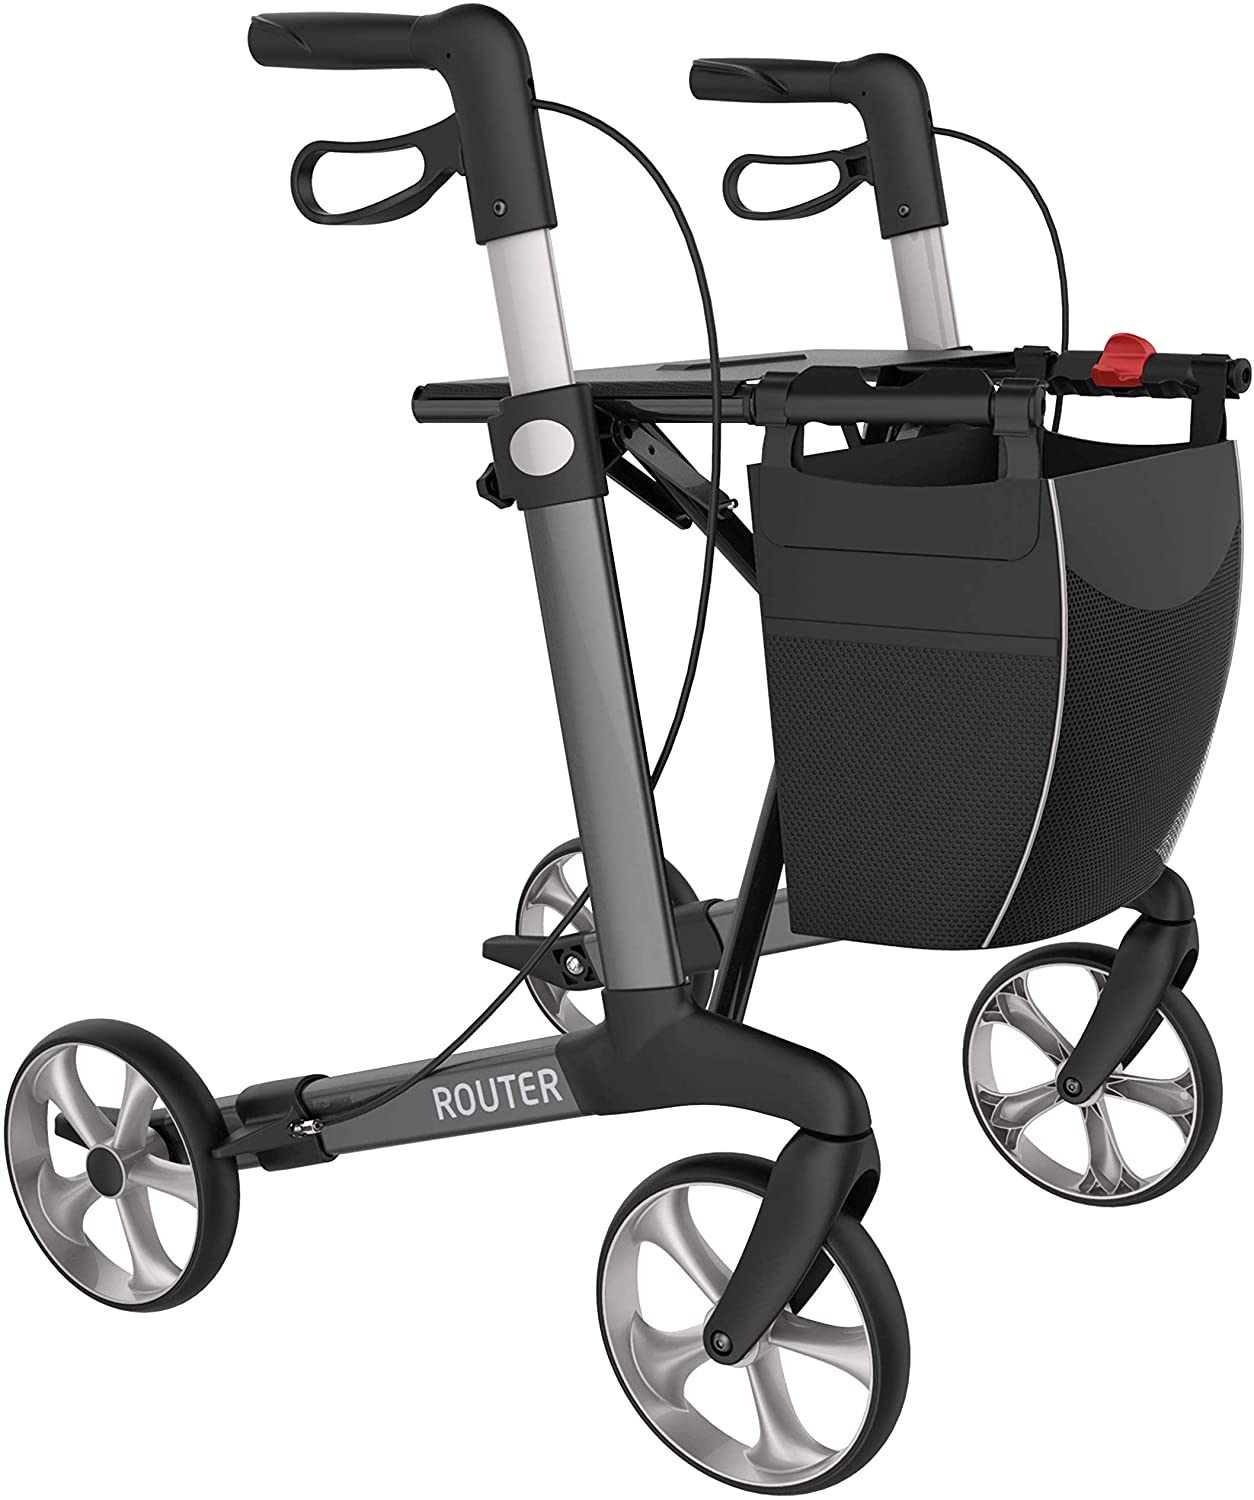 Hablicare® Premium Lightweight Rollator Set Router, with One Handle, Foldab